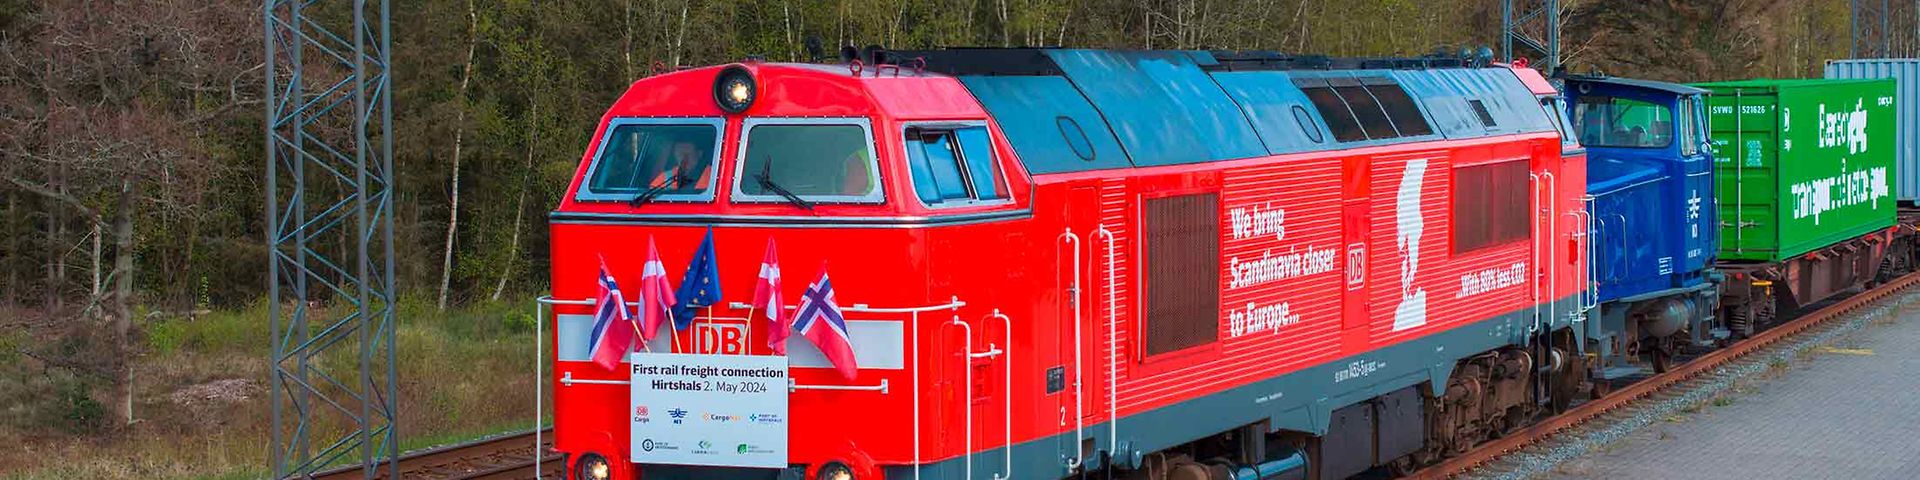 Freight train on trial run to Hirtshals running with Norwegian, Danish and EU flags.